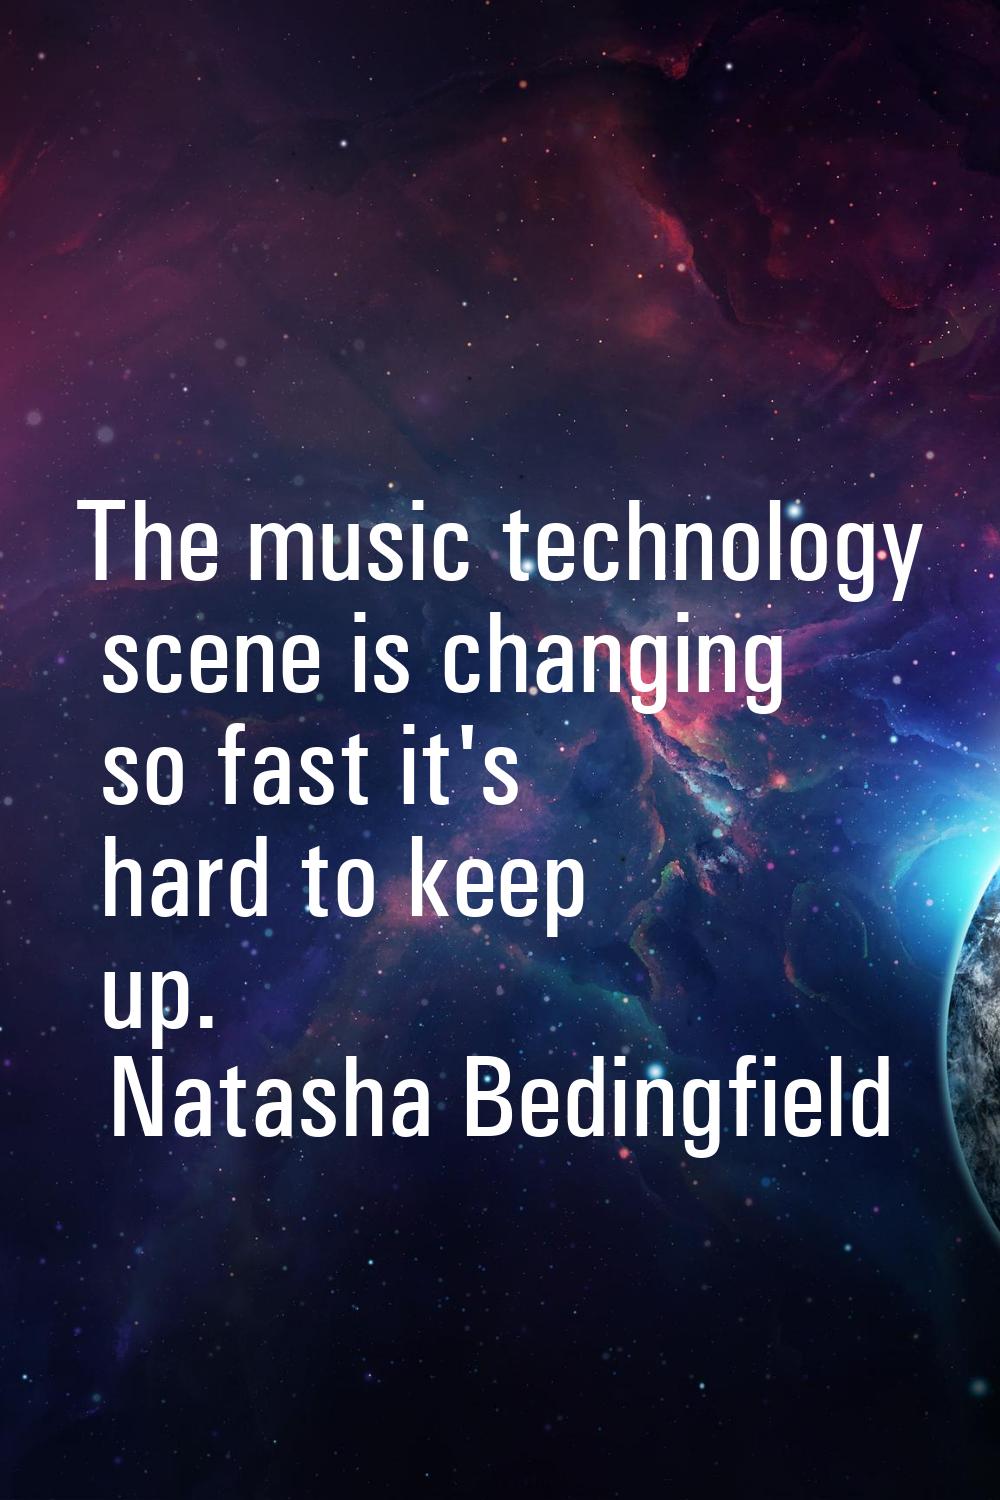 The music technology scene is changing so fast it's hard to keep up.